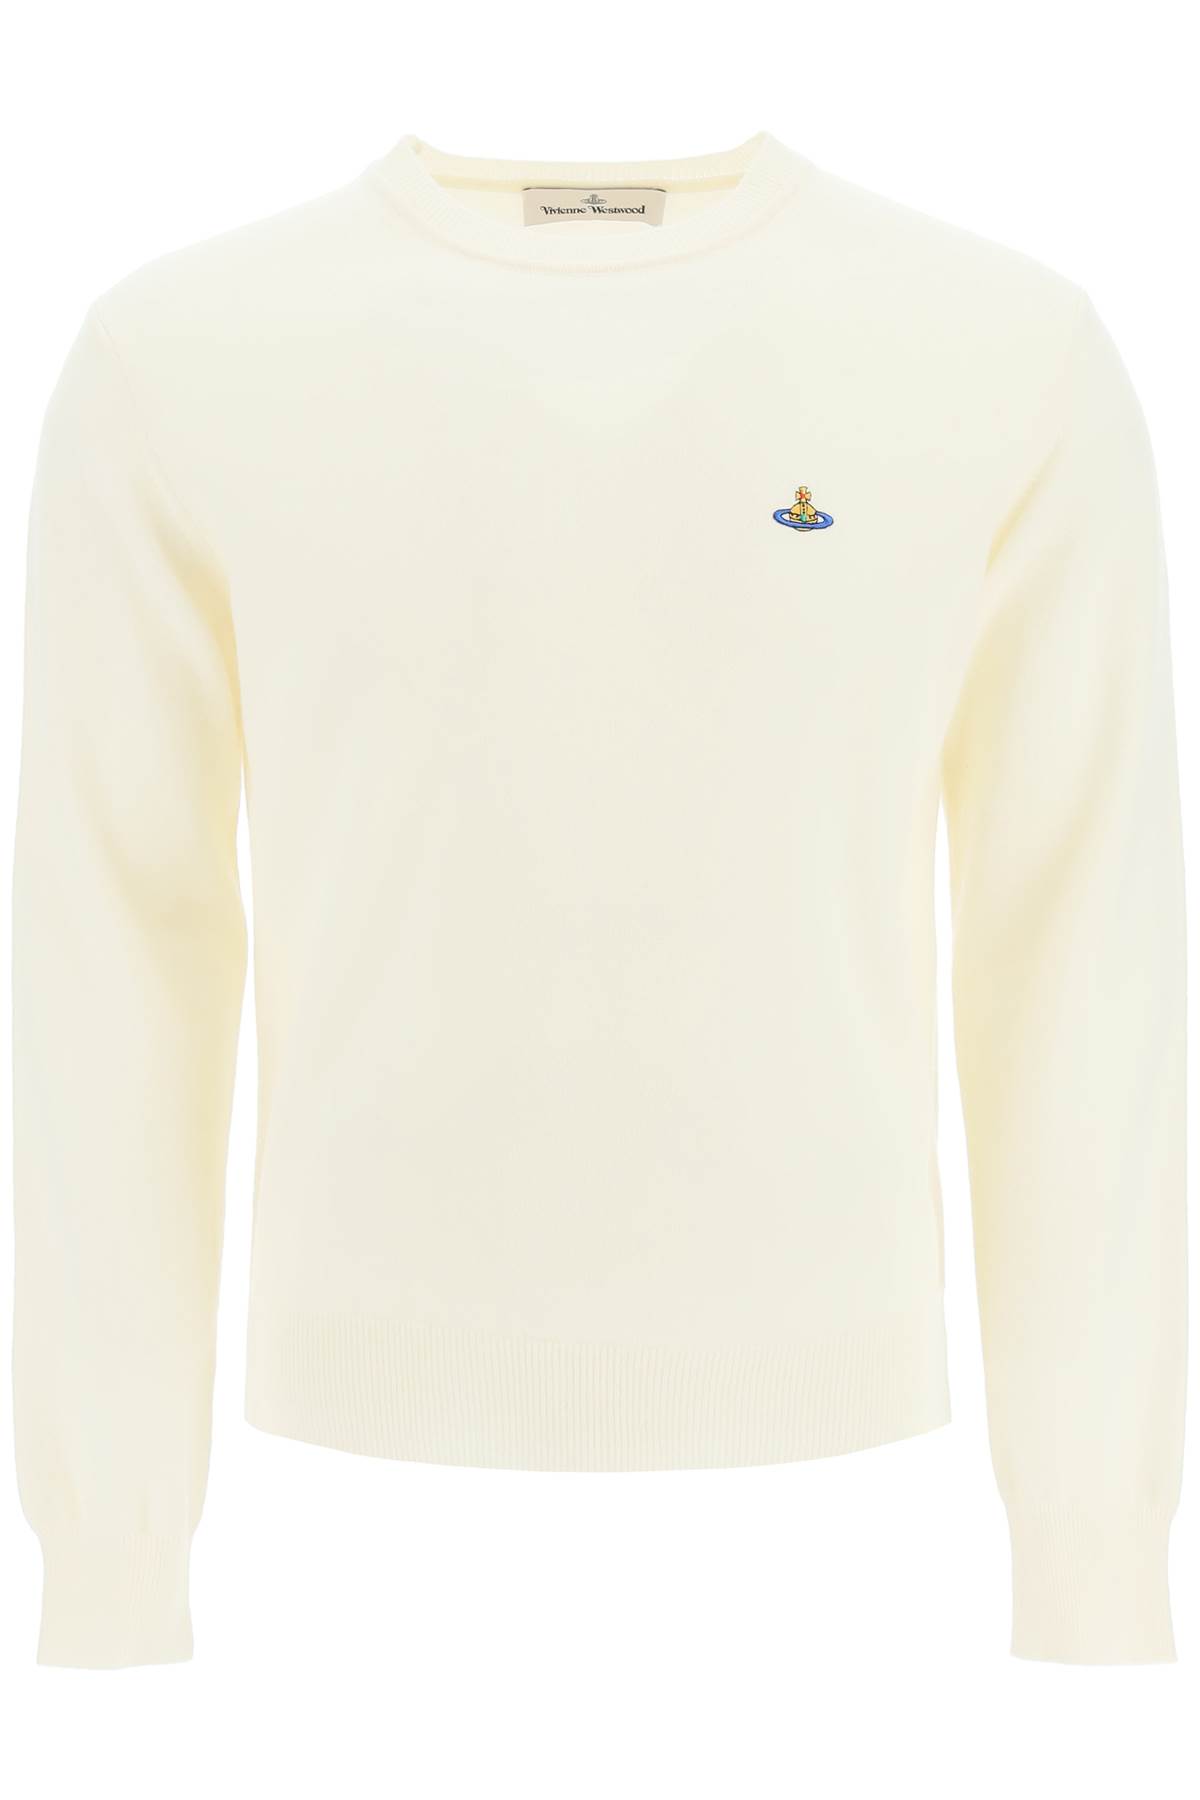 VIVIENNE WESTWOOD ORB EMBROIDERY WOOL AND CASHMERE SWEATER